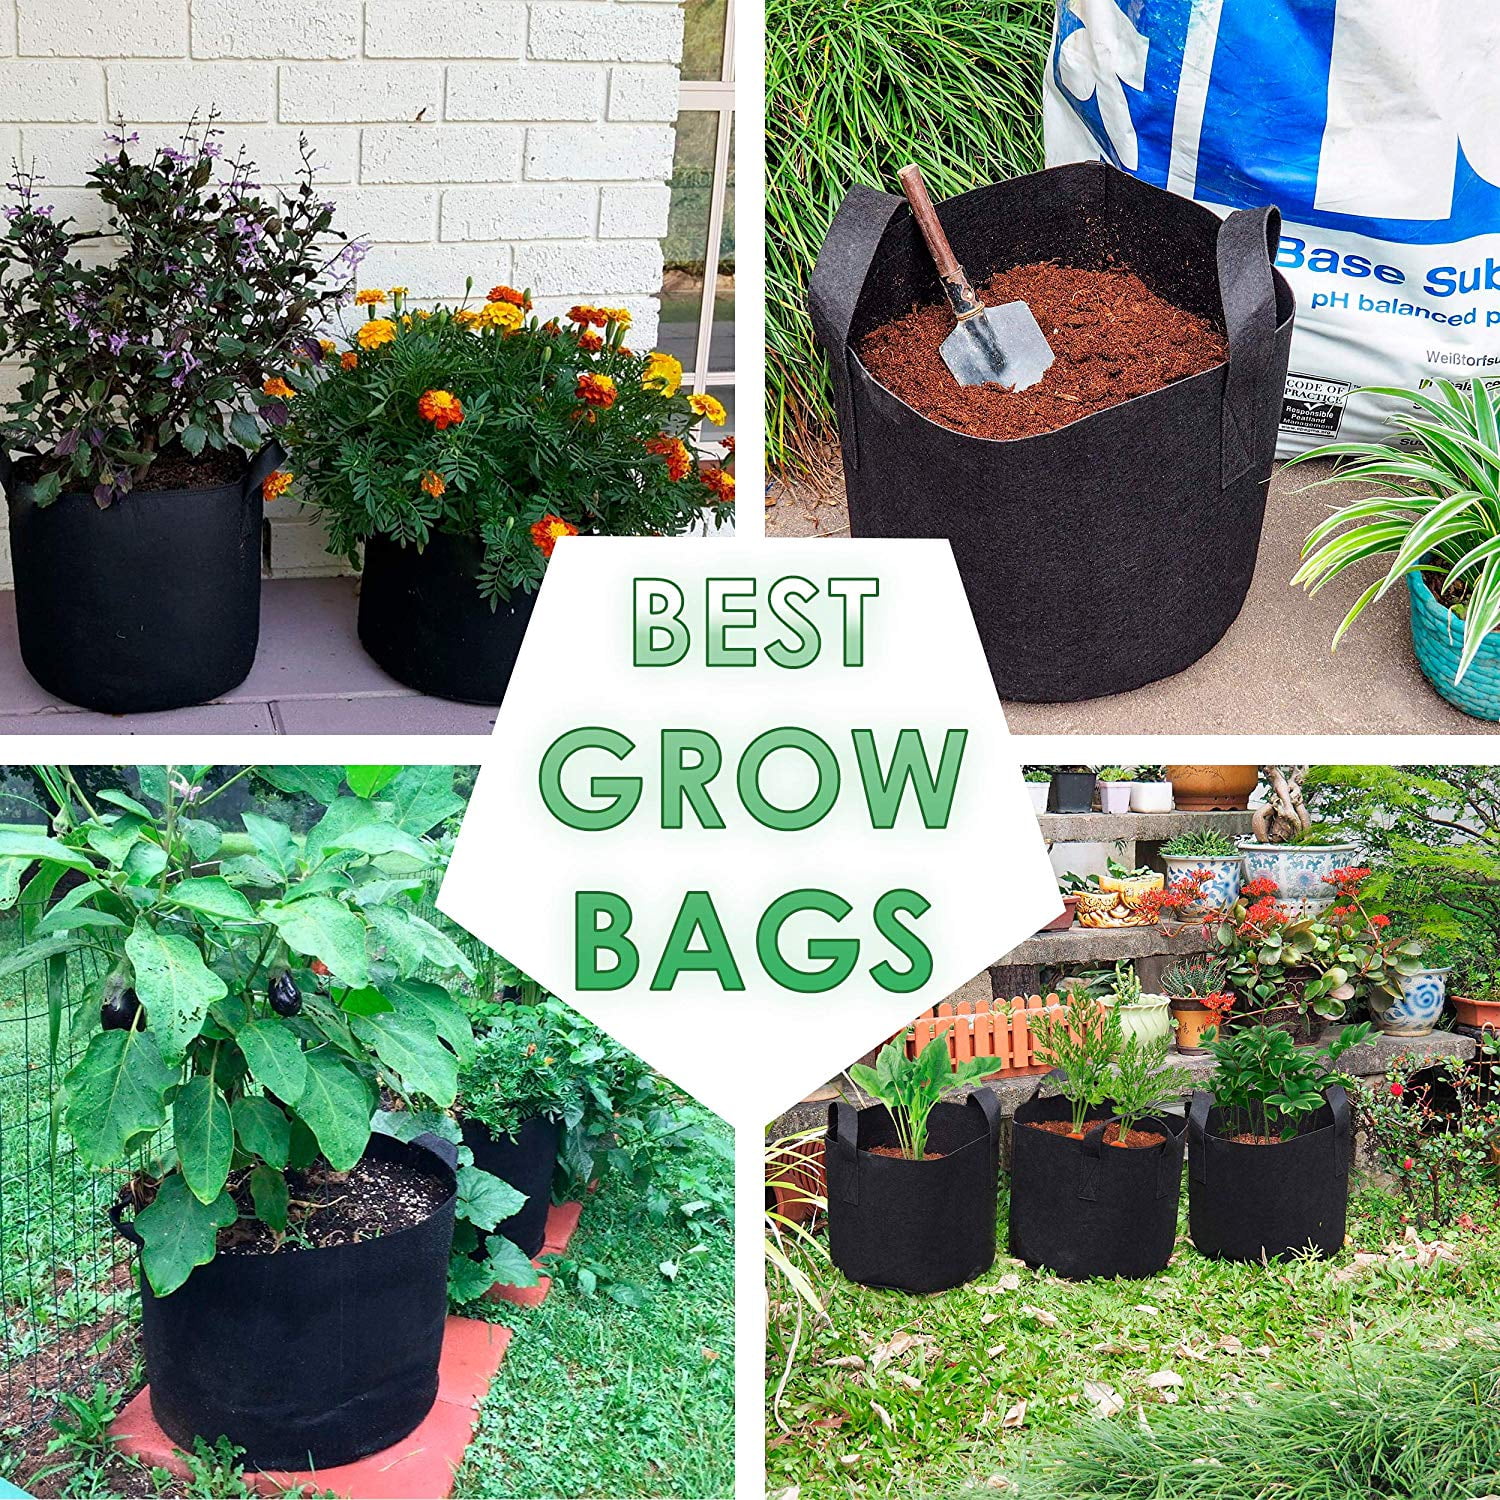 Details about   Heavy Duty Fabric Pots with Multiuse Rings 5 Gallon Grow Bags for Gardening 